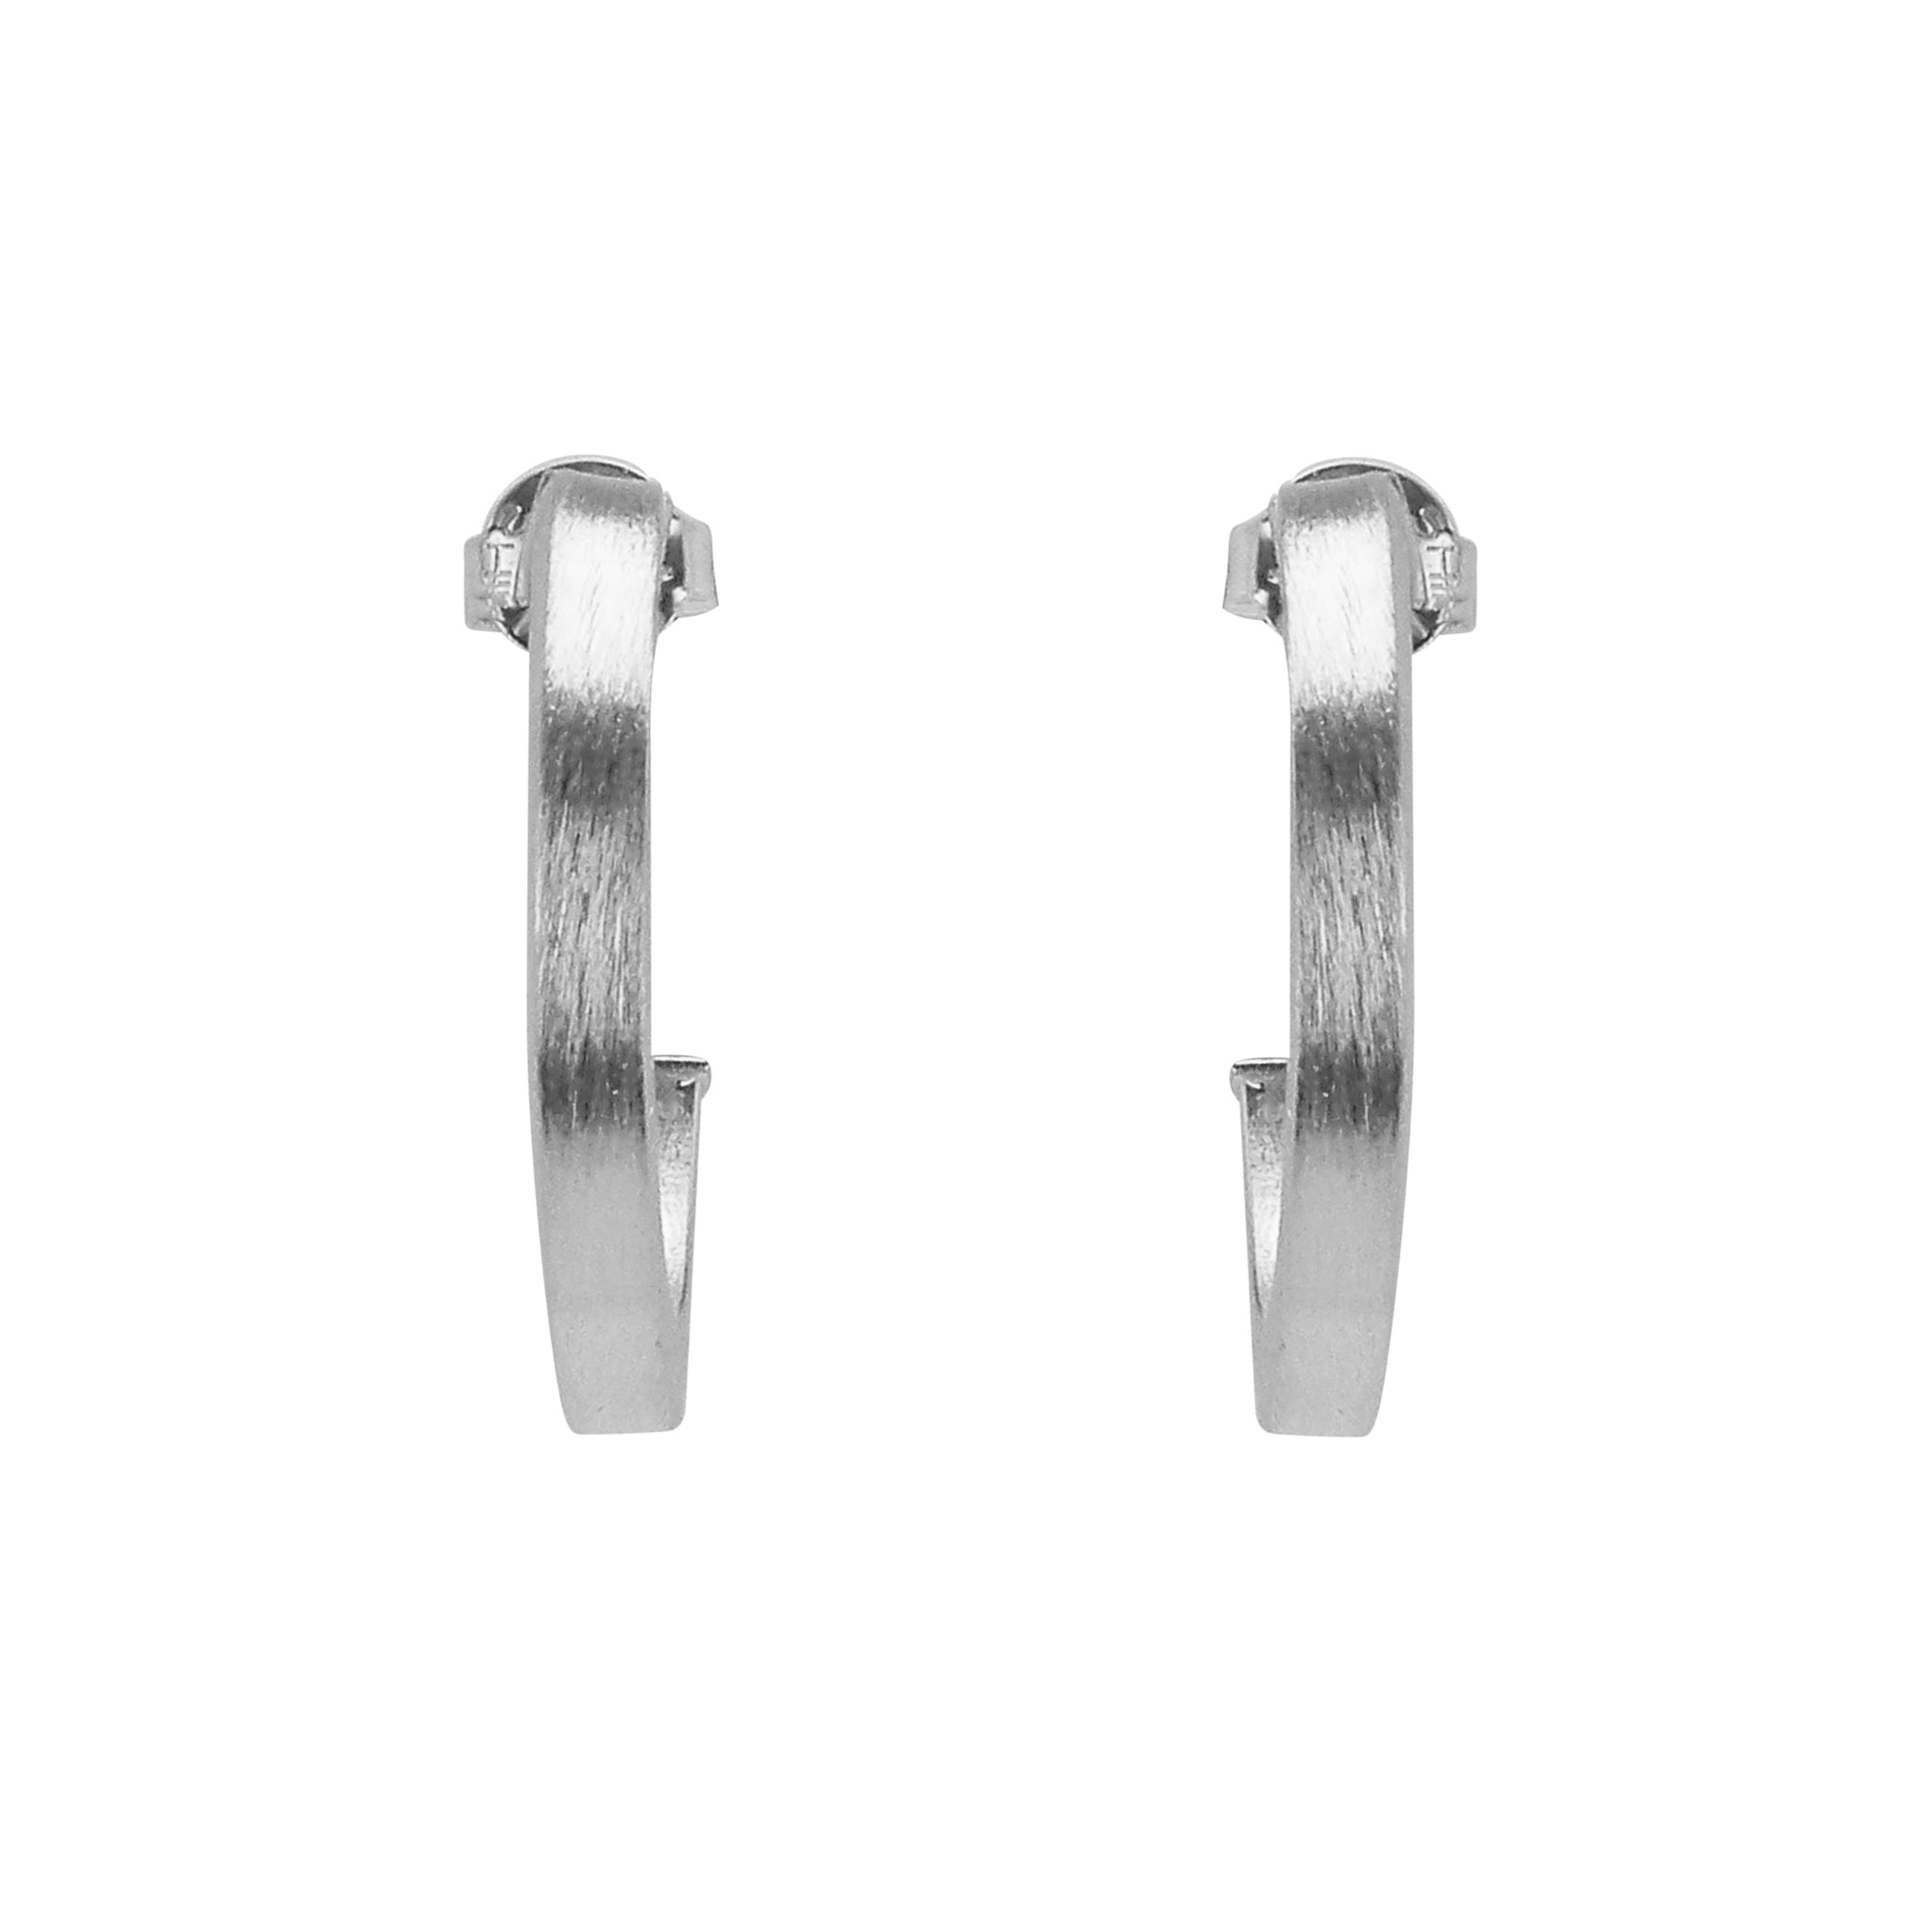 Front View of Sheila Fajl Ilana Bold Square Tube Hoop Earrings in Silver Plated